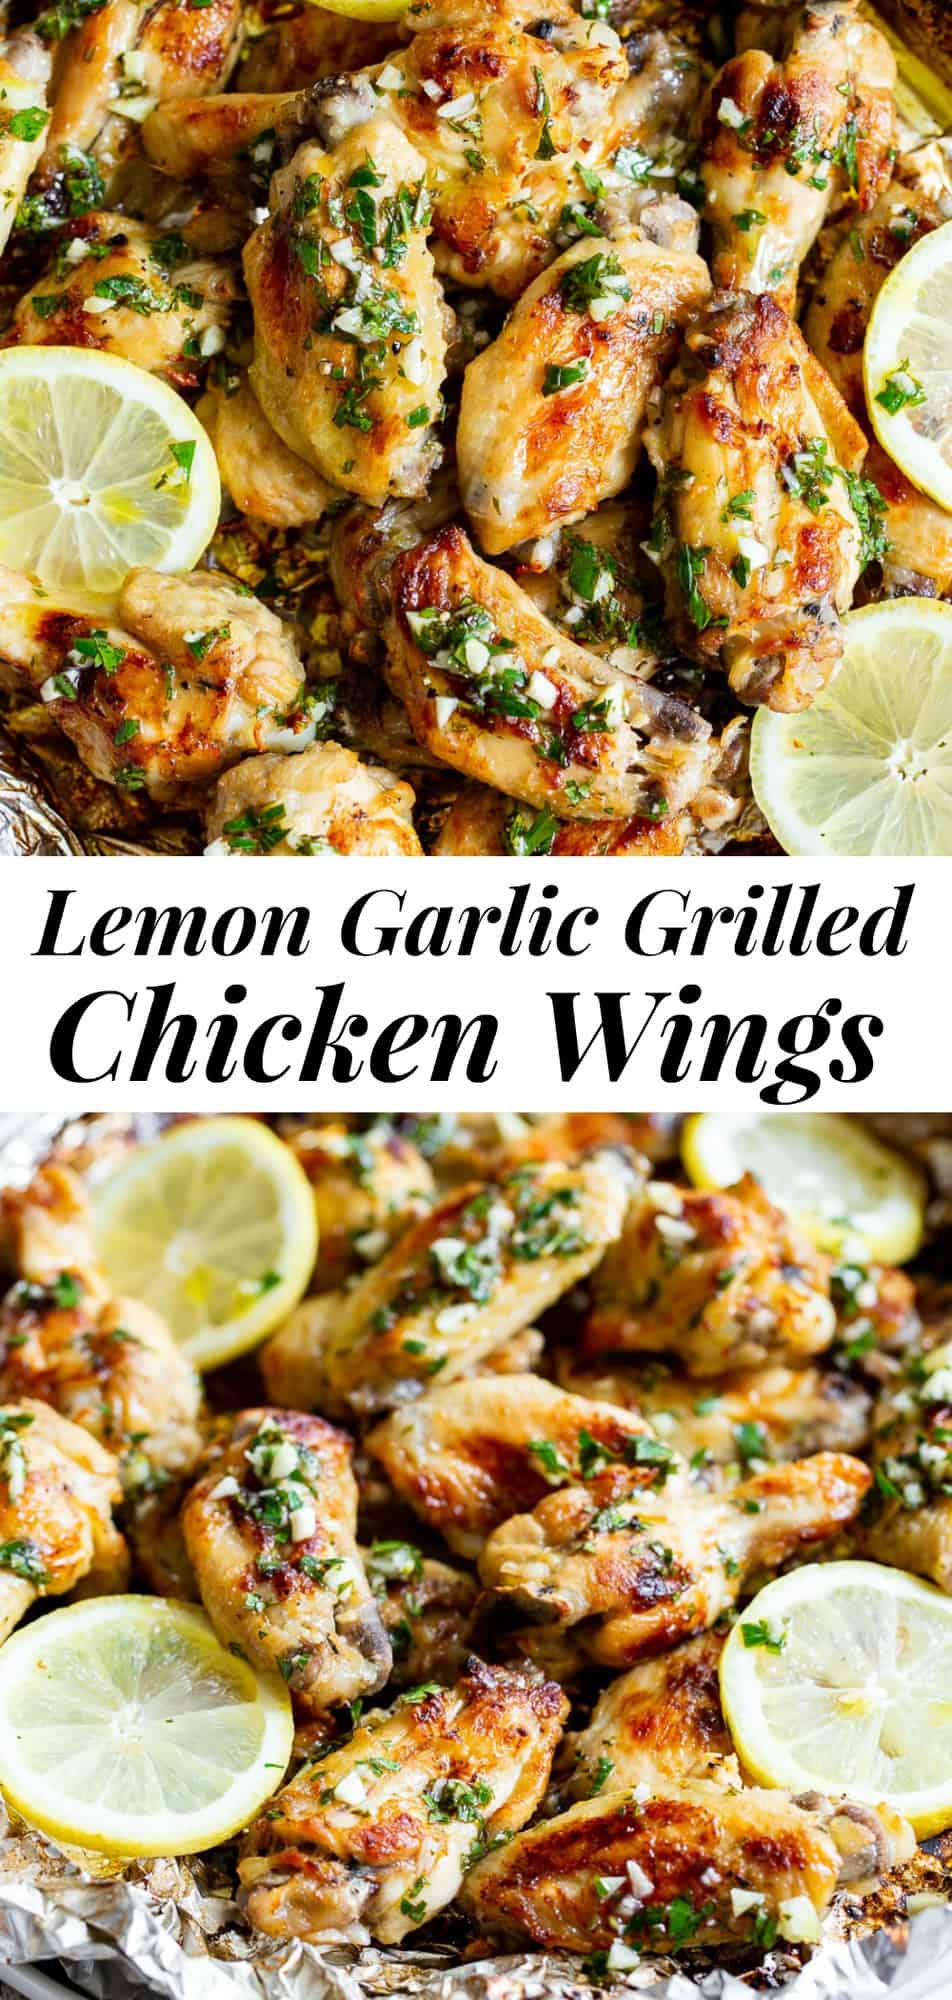 These delicious grilled chicken wings have an easy sauce with lots of bright lemon, savory garlic, and fresh herbs and go perfectly with all your favorite potato salads and summer sides! These flavor-packed wings are Whole30 compliant, paleo, keto, and dairy-free. Made on the grill with Reynolds Wrap Heavy Duty Aluminum Foil so you don’t have to worry about the foil breaking or tearing. #AD #keto #paleo #whole30 #cleaneating #ReynoldsPartner @ReynoldsBrands